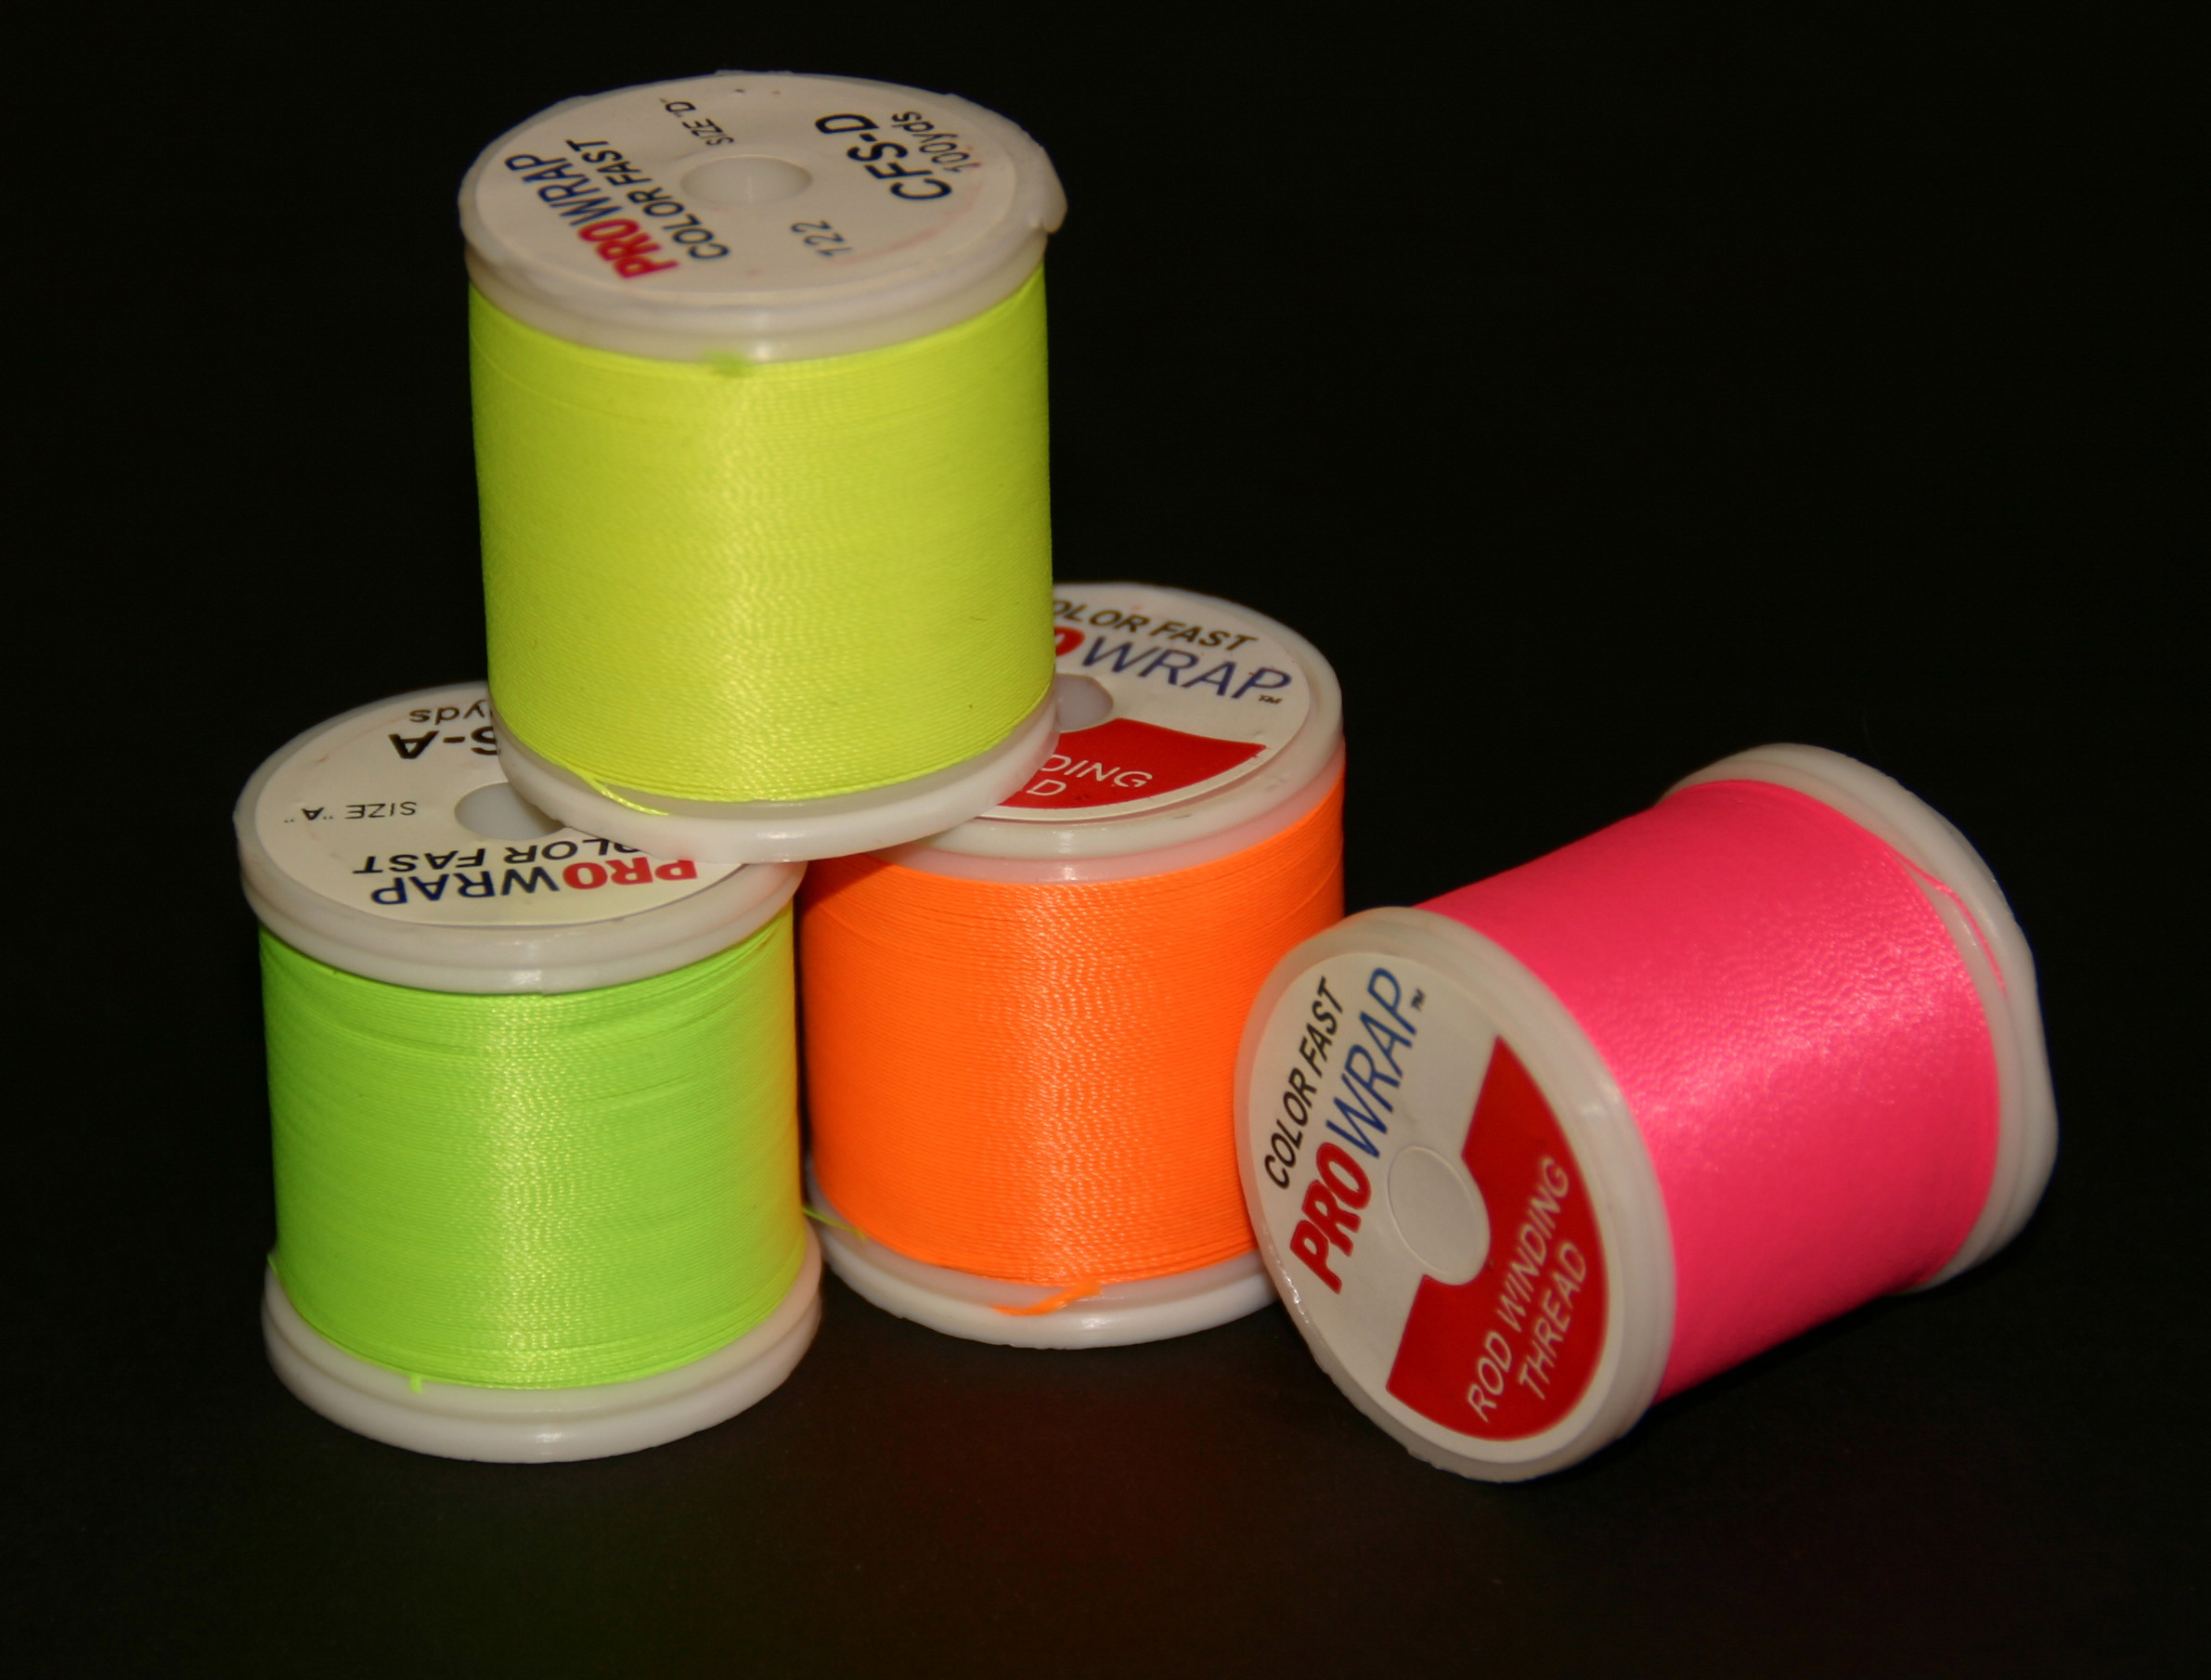 PRO WRAP COLOR FAST BLUE AND NEON COLORS SIZE A 100 YD SPOOLS CFS-A